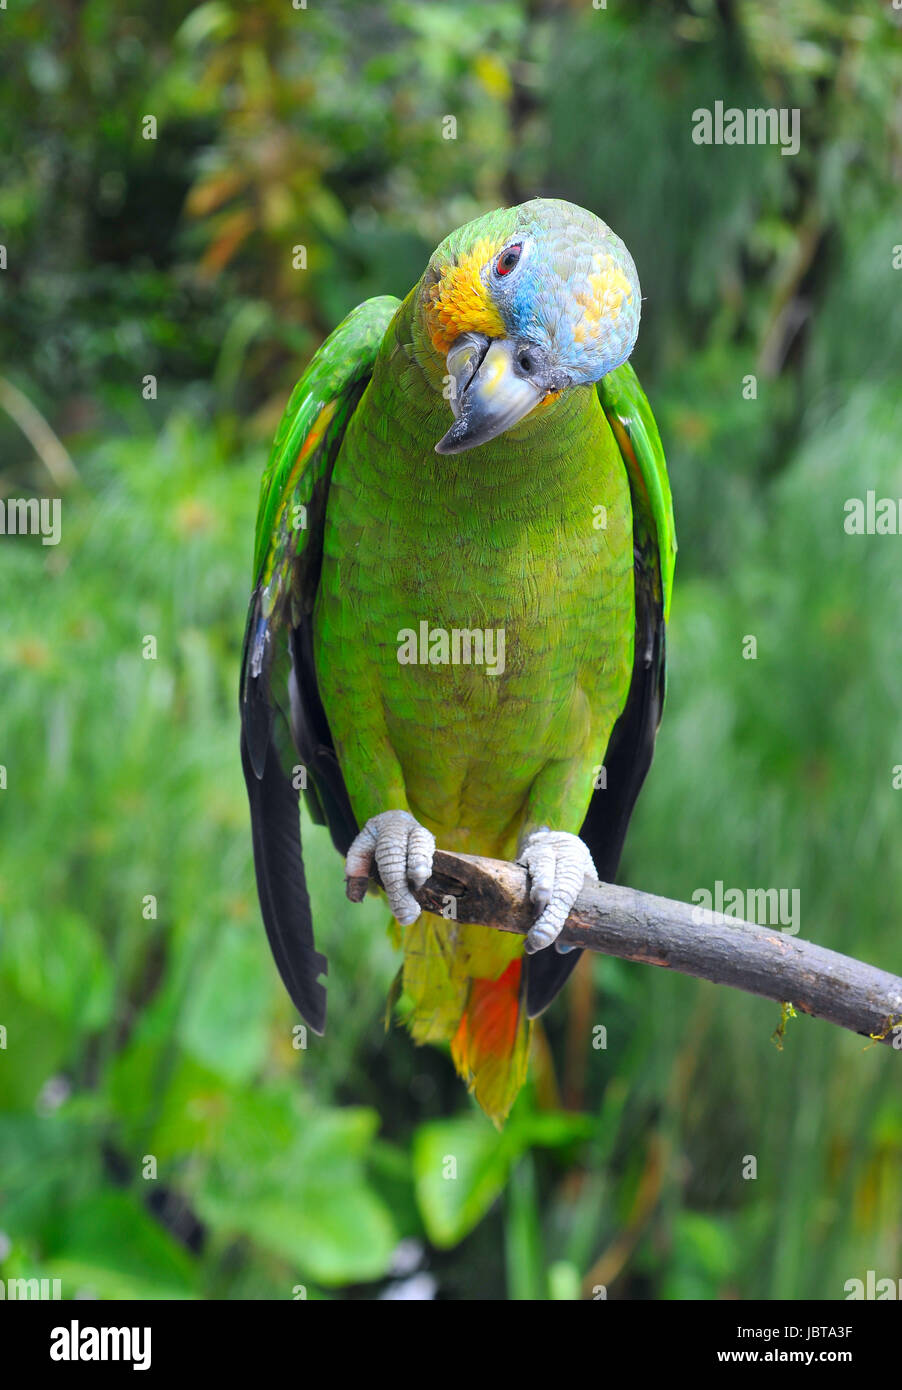 Parrot in the rainforest perching on a branch. The Festive Amazon (Amazona festiva), also known as the Festive Parrot, is a species of parrot in the Psittacidae family. It is found in Brazil, Colombia, Ecuador, Guyana, Peru, and Venezuela. Stock Photo